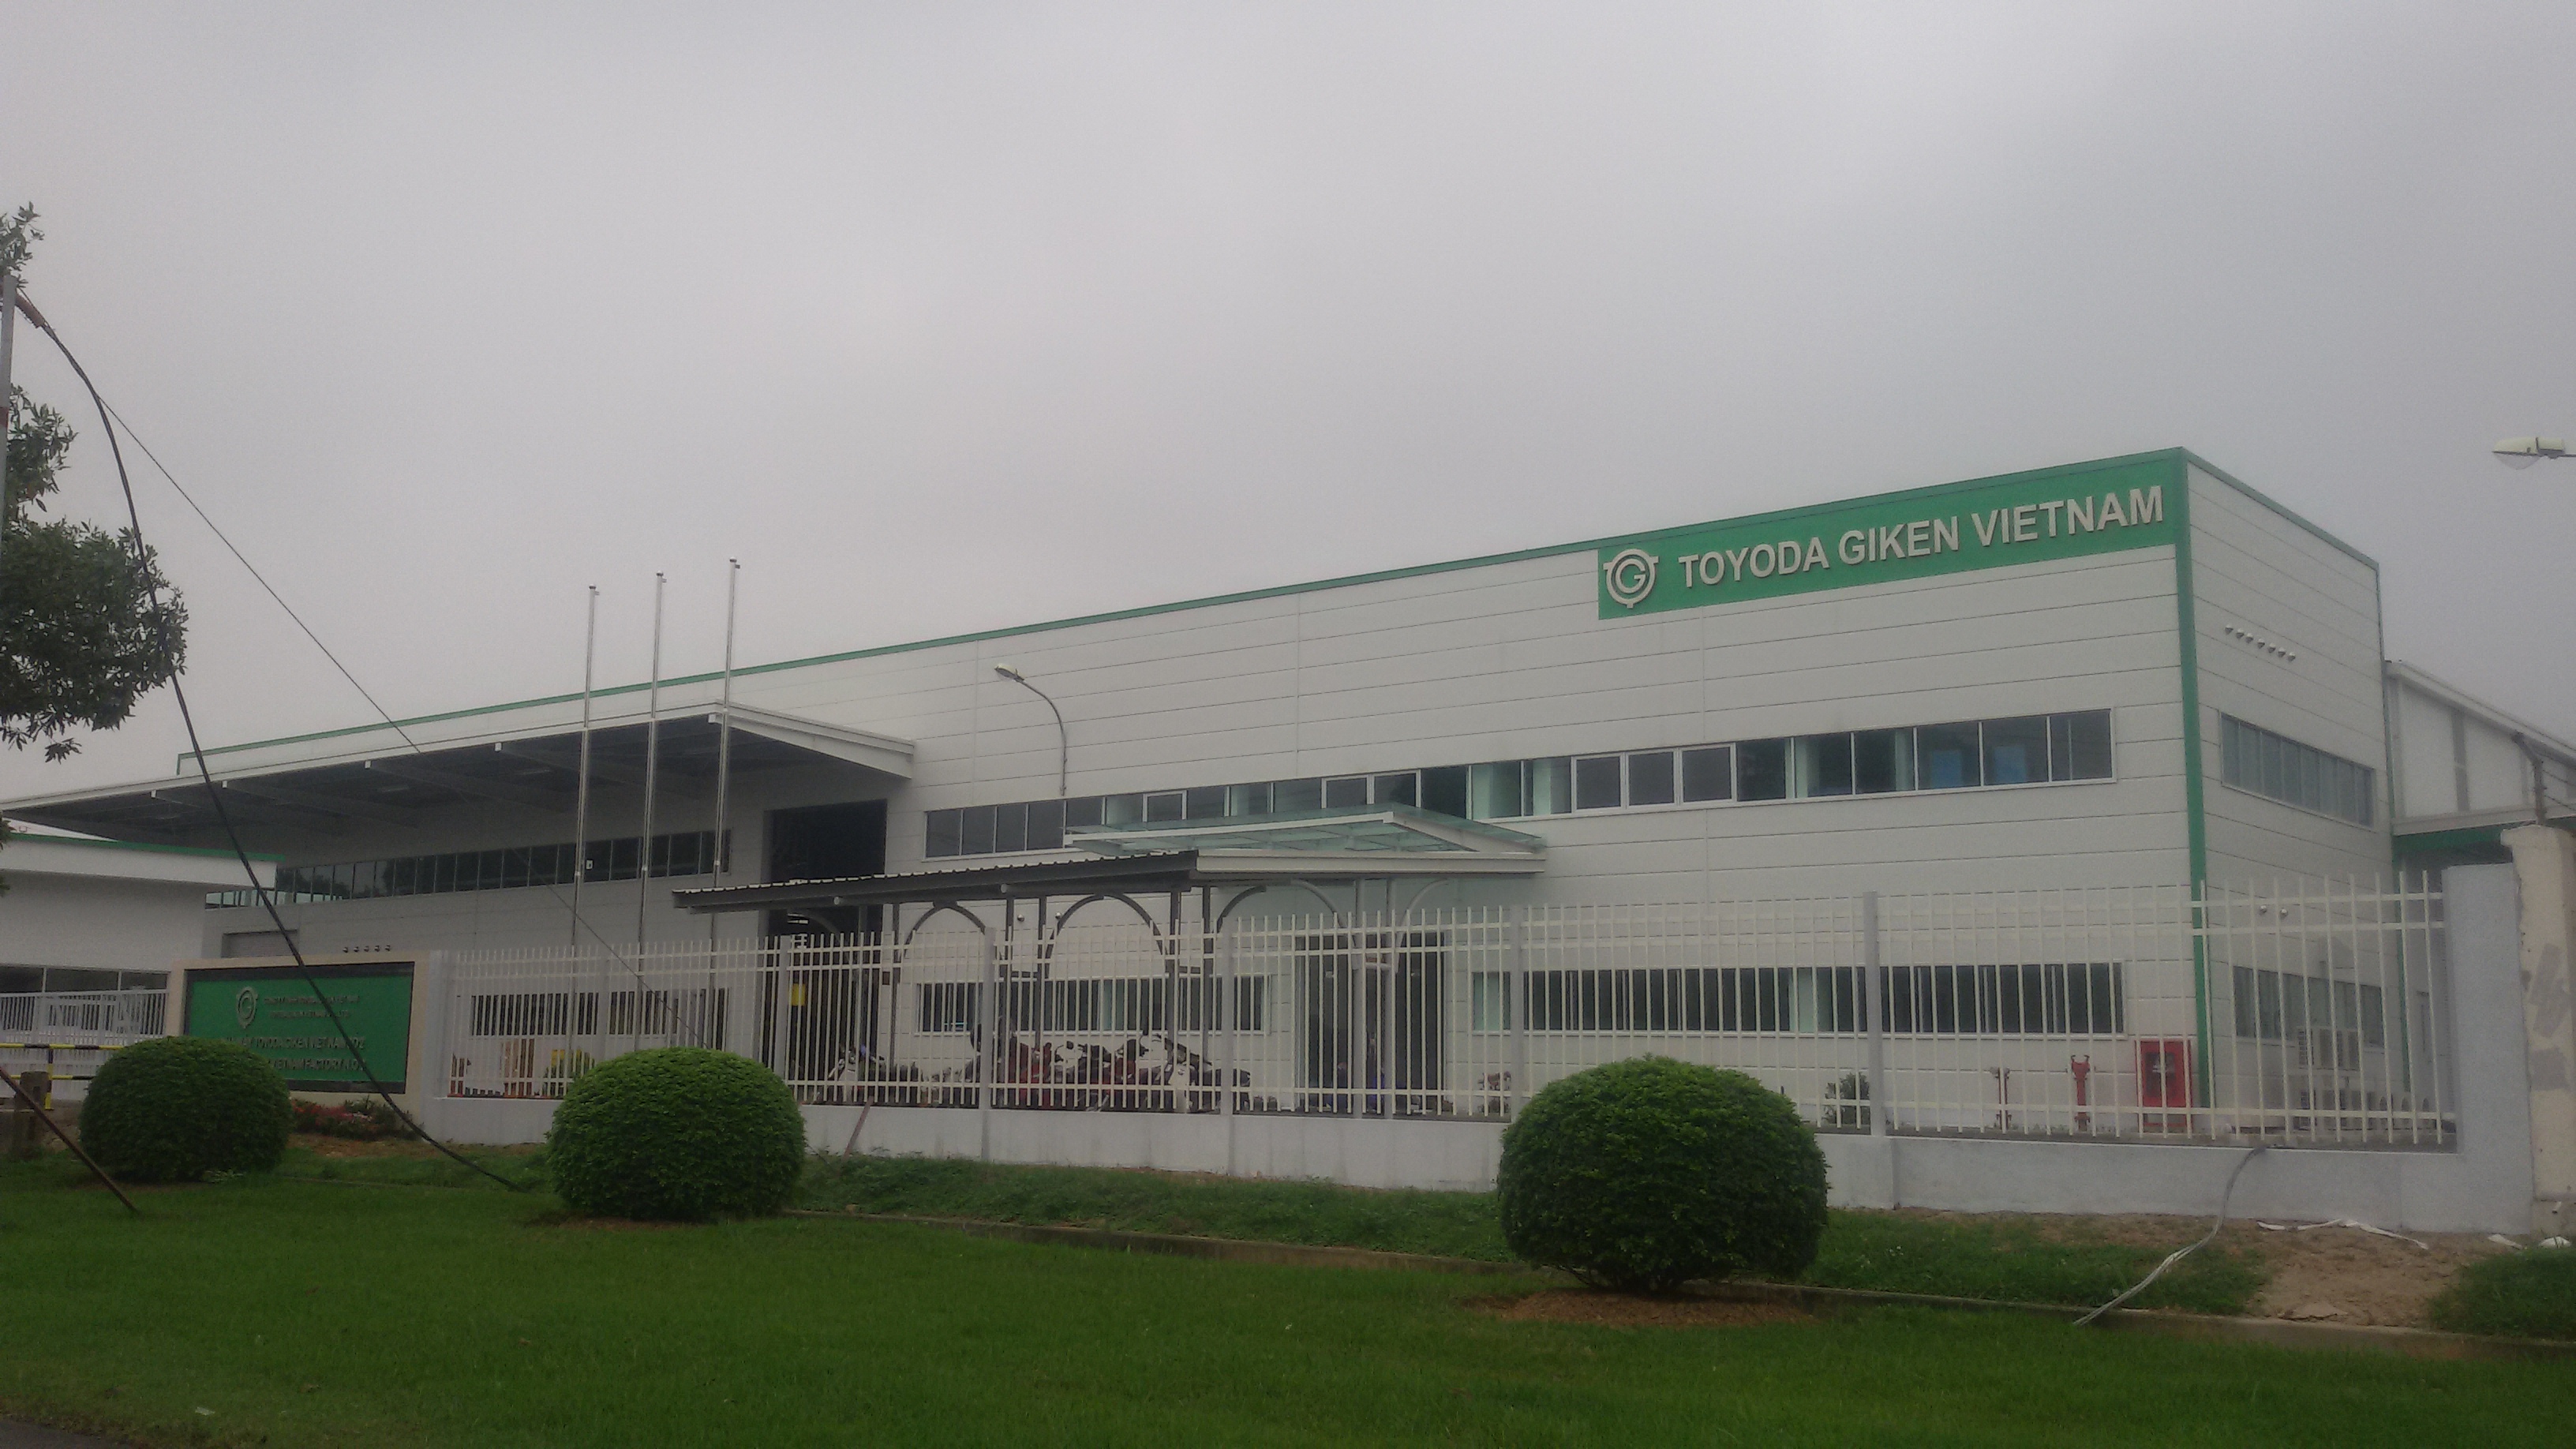 TOYODA GIKEN VIETNAM – The SECONDARY FACTORY PHASE 1 PROJECT0